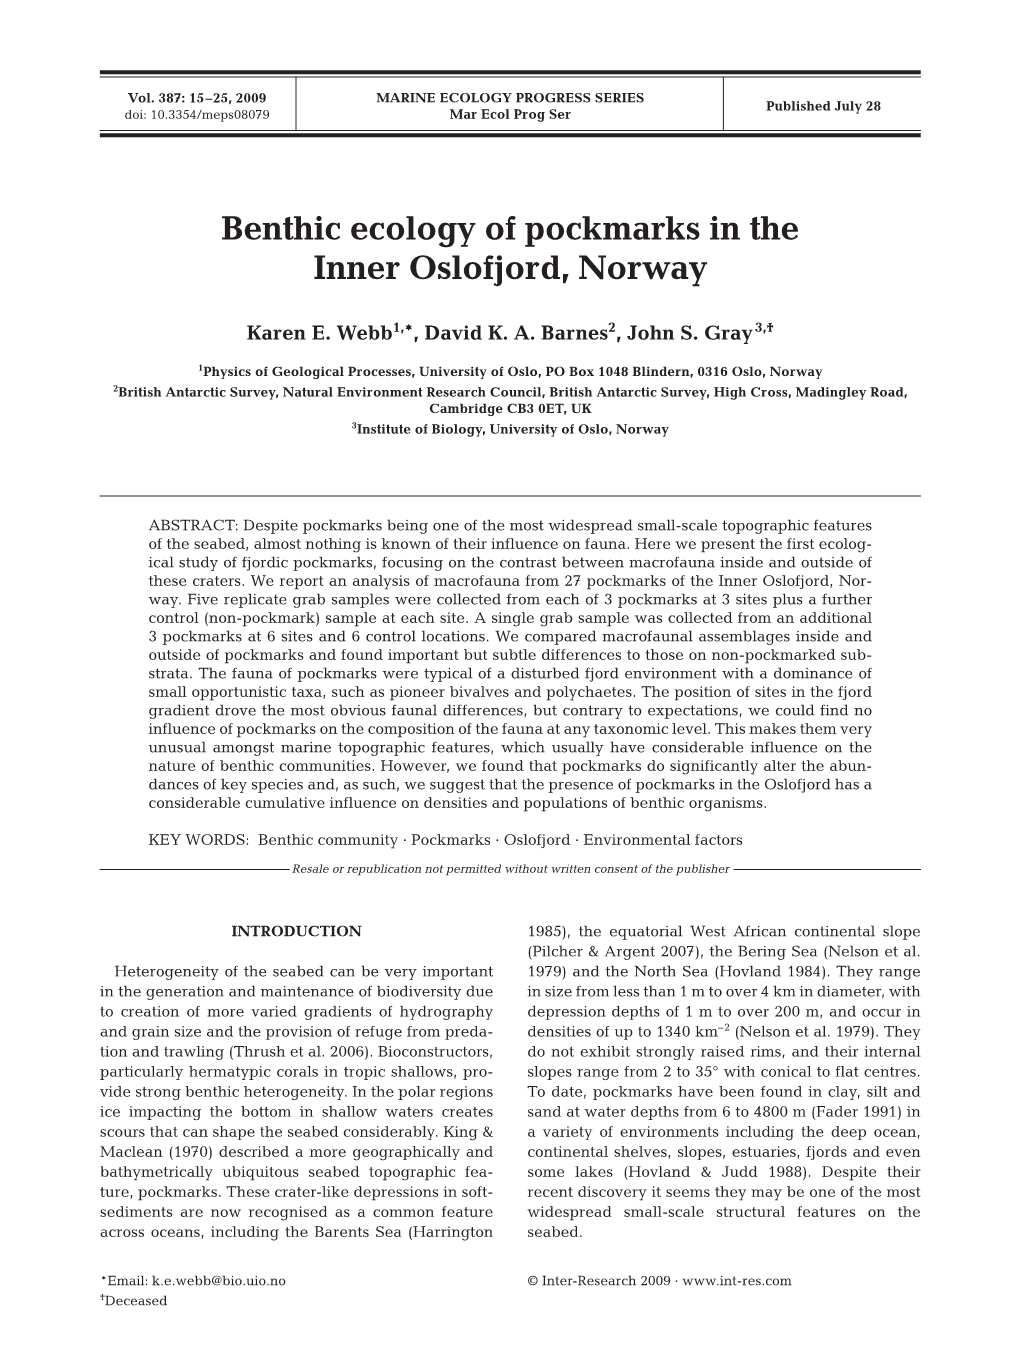 Benthic Ecology of Pockmarks in the Inner Oslofjord, Norway